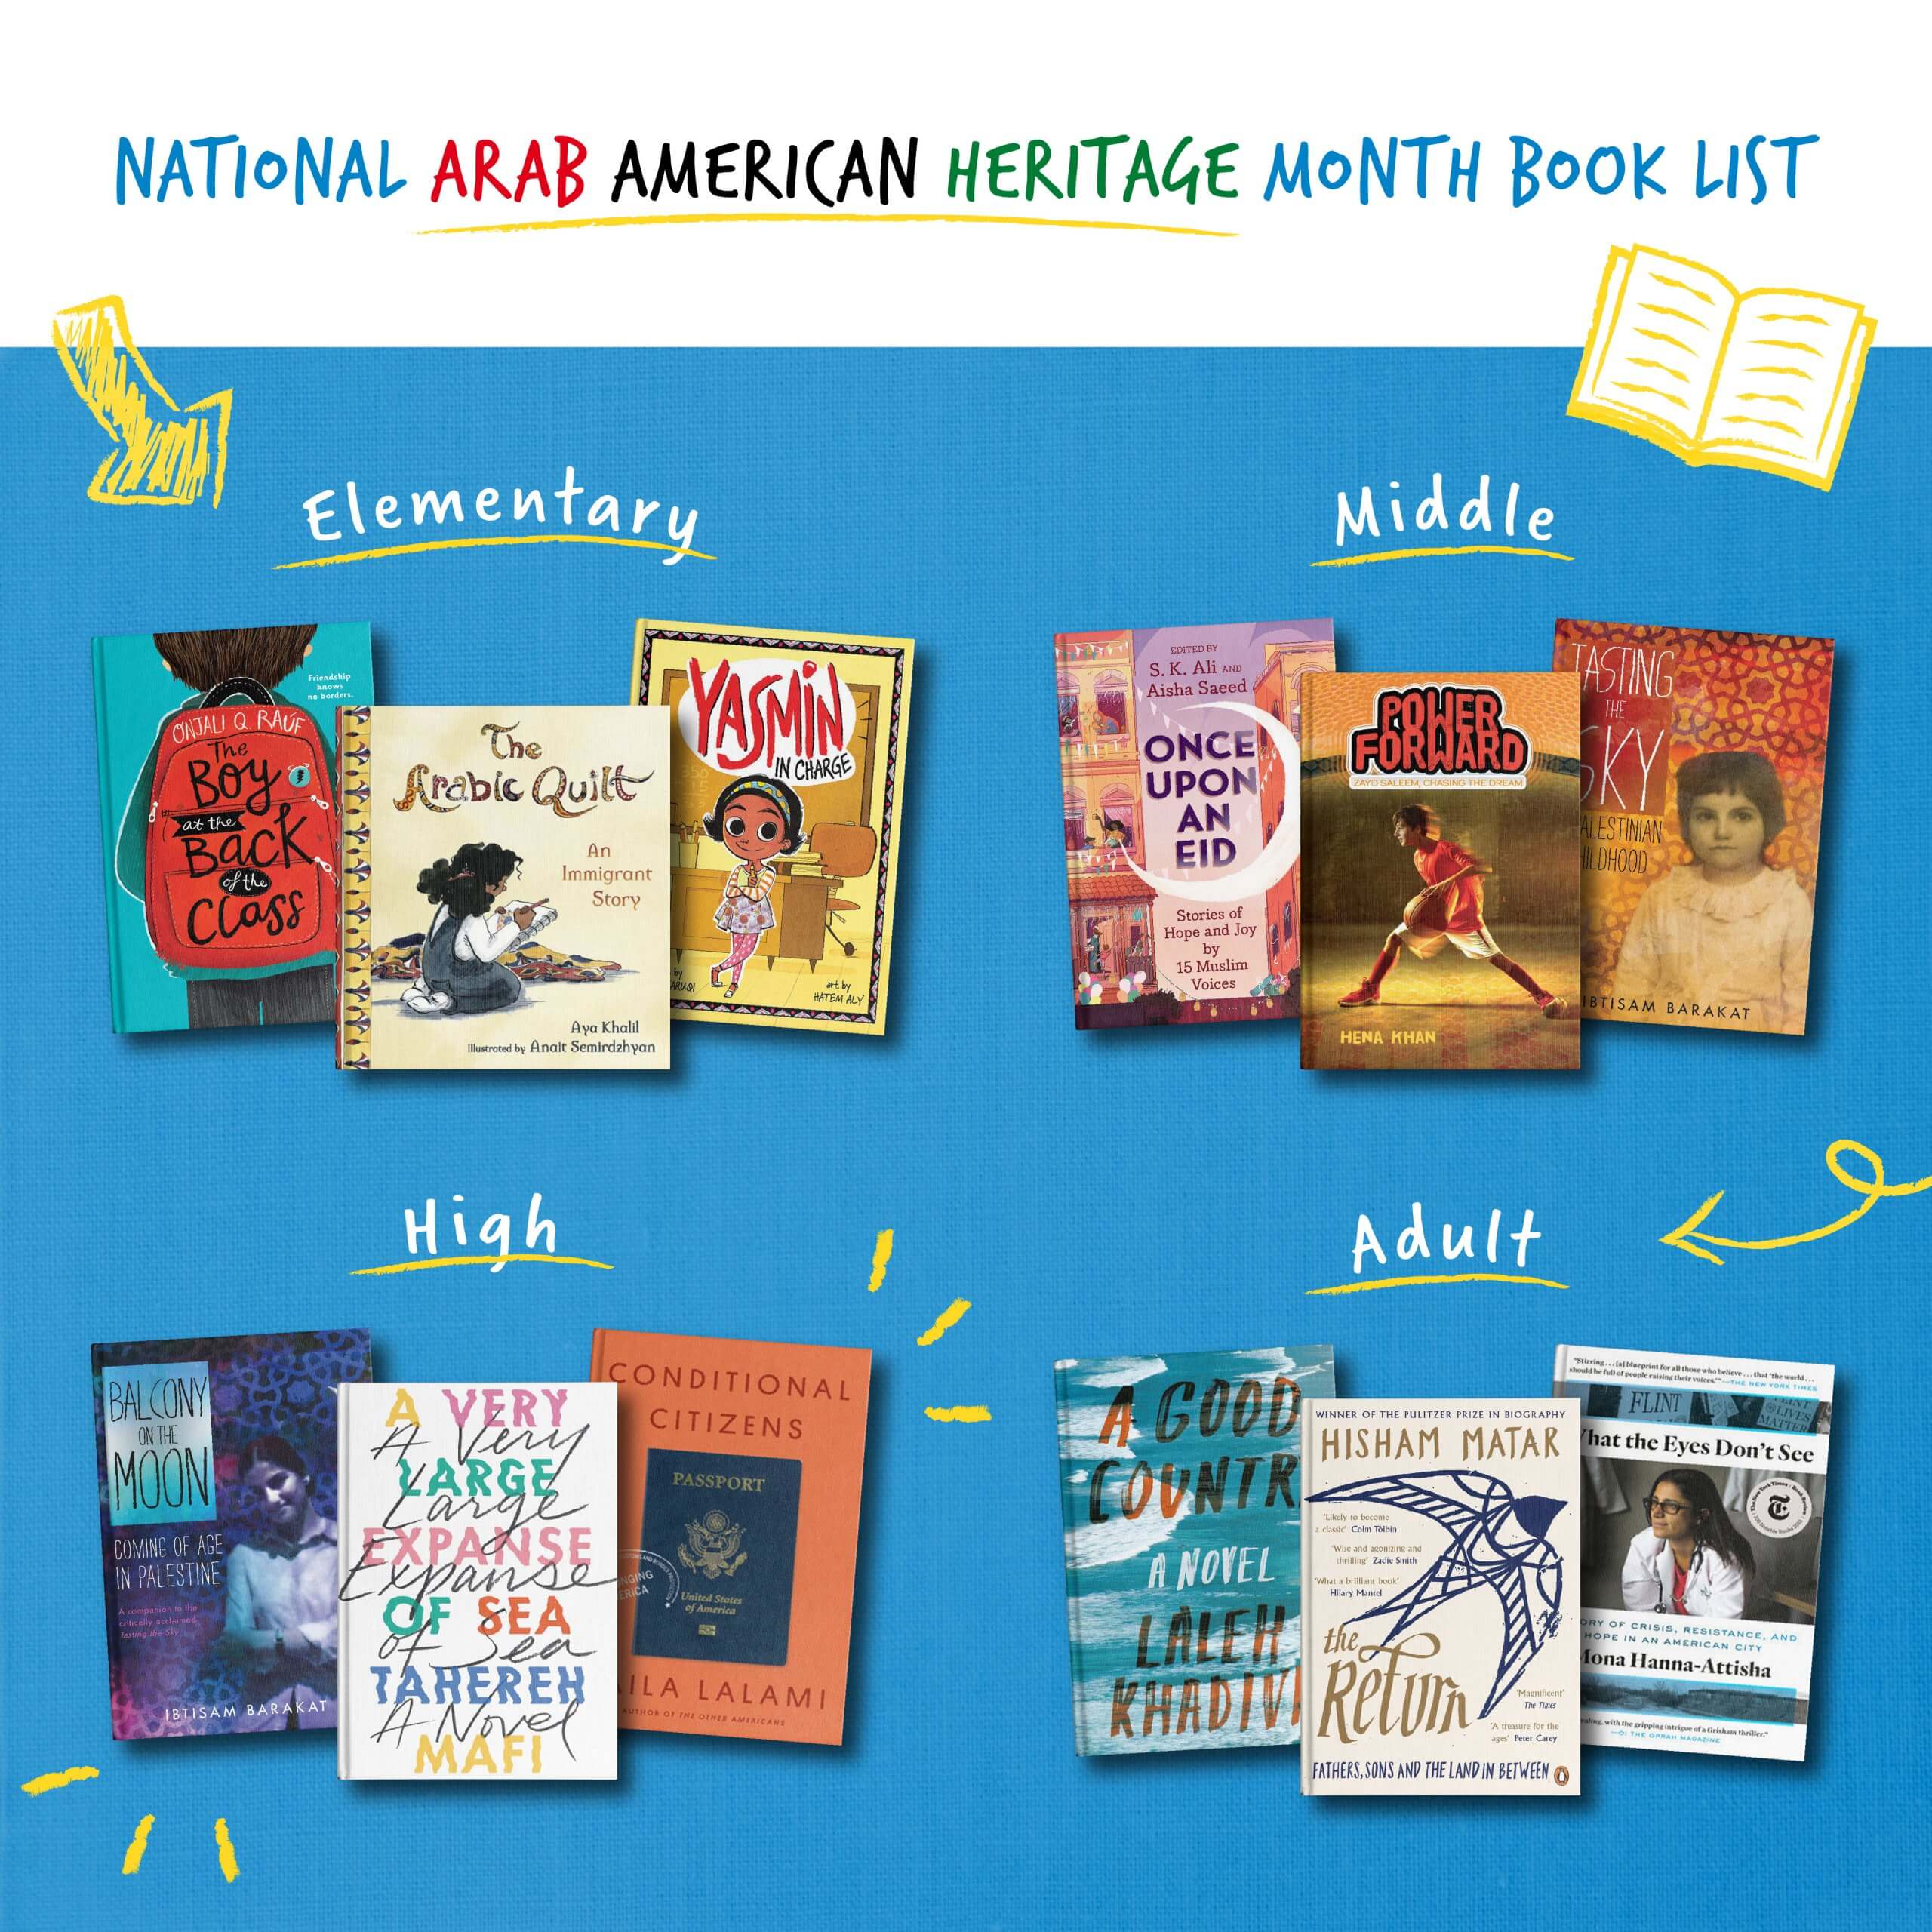 National Arab American Heritage Month Book List | Achievement First